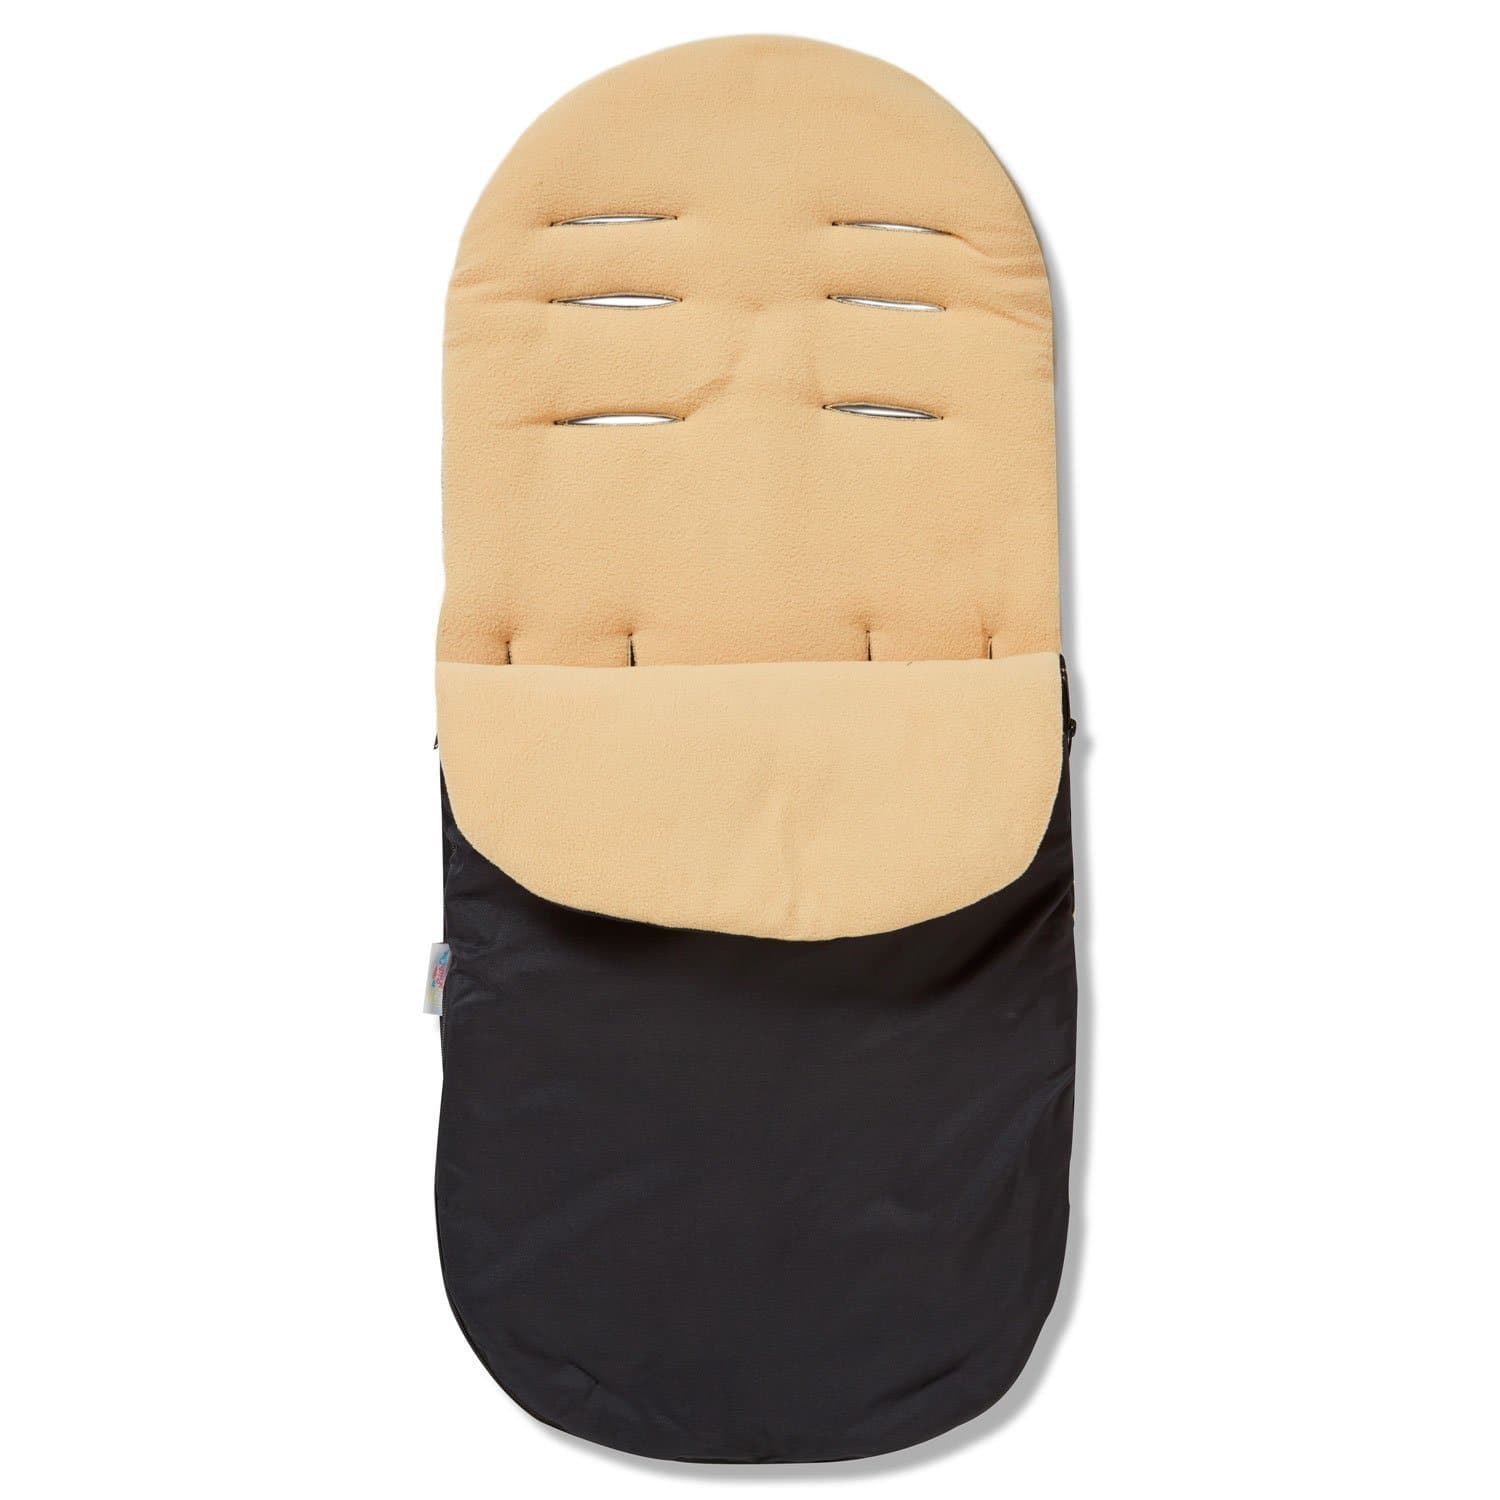 Footmuff / Cosy Toes Compatible with Hesba - Sand / Fits All Models | For Your Little One